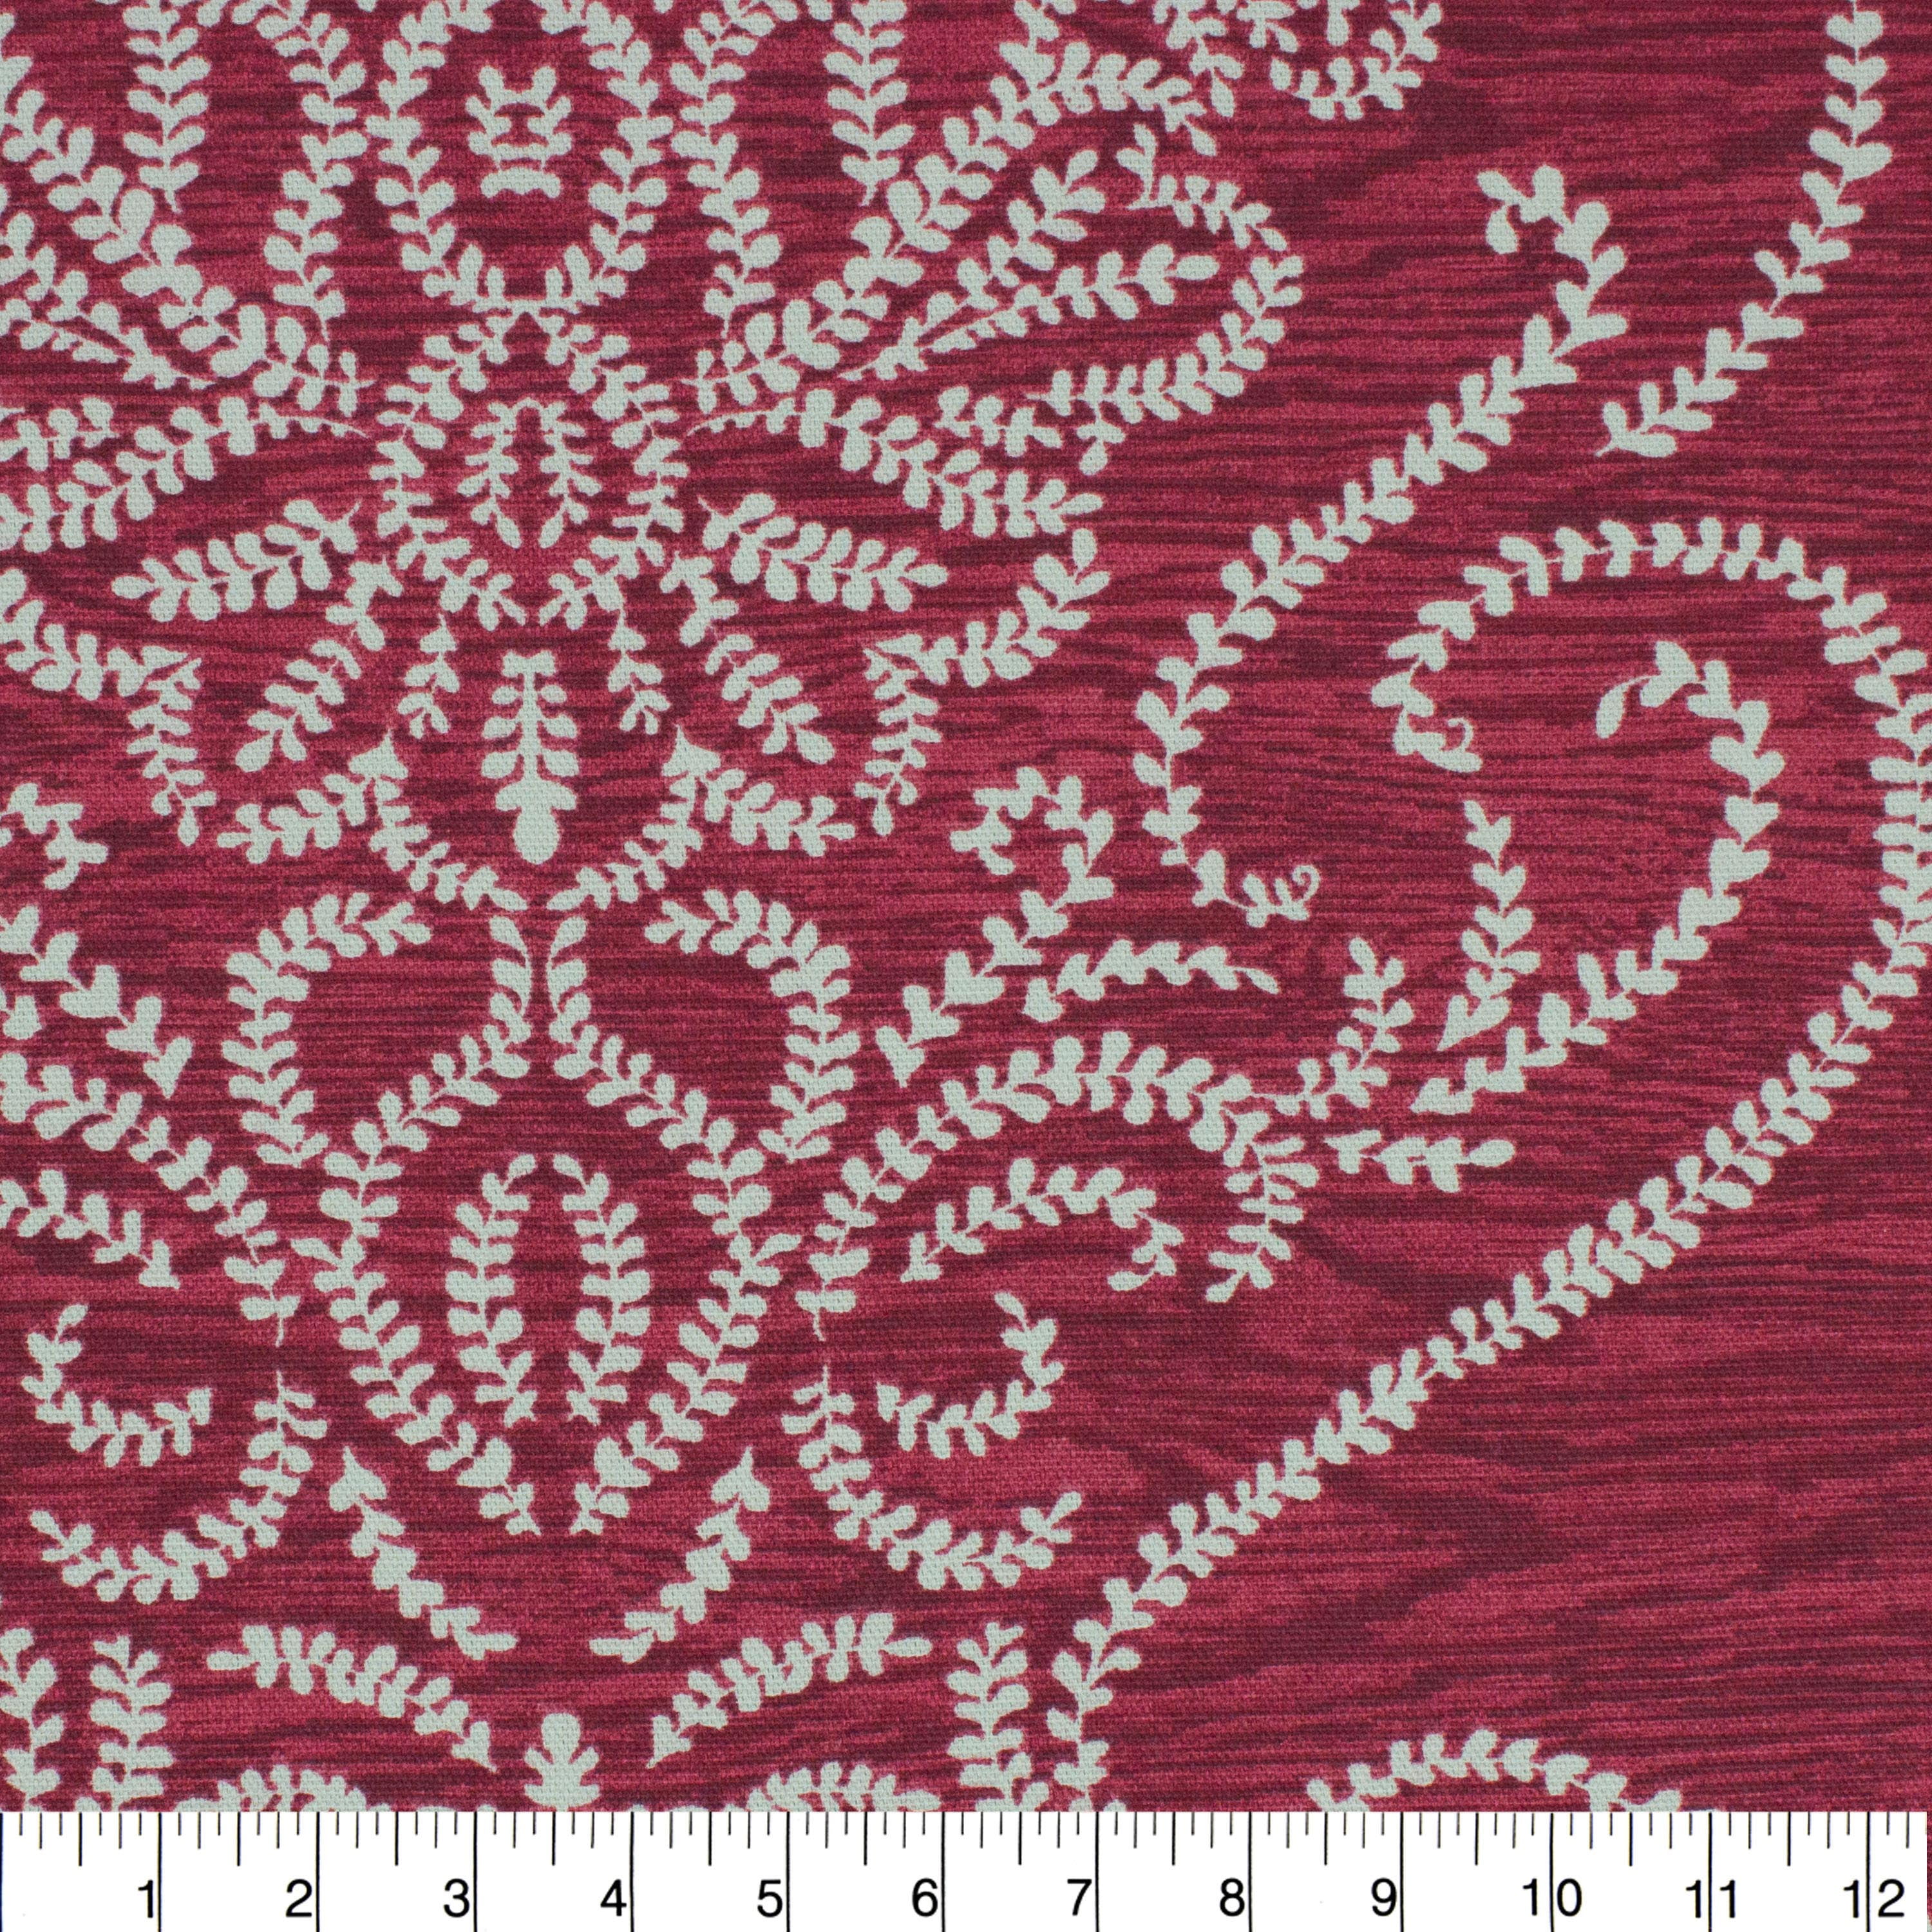 Better Homes and Gardens Precut Fabric 72inx45in (2yards) Damask